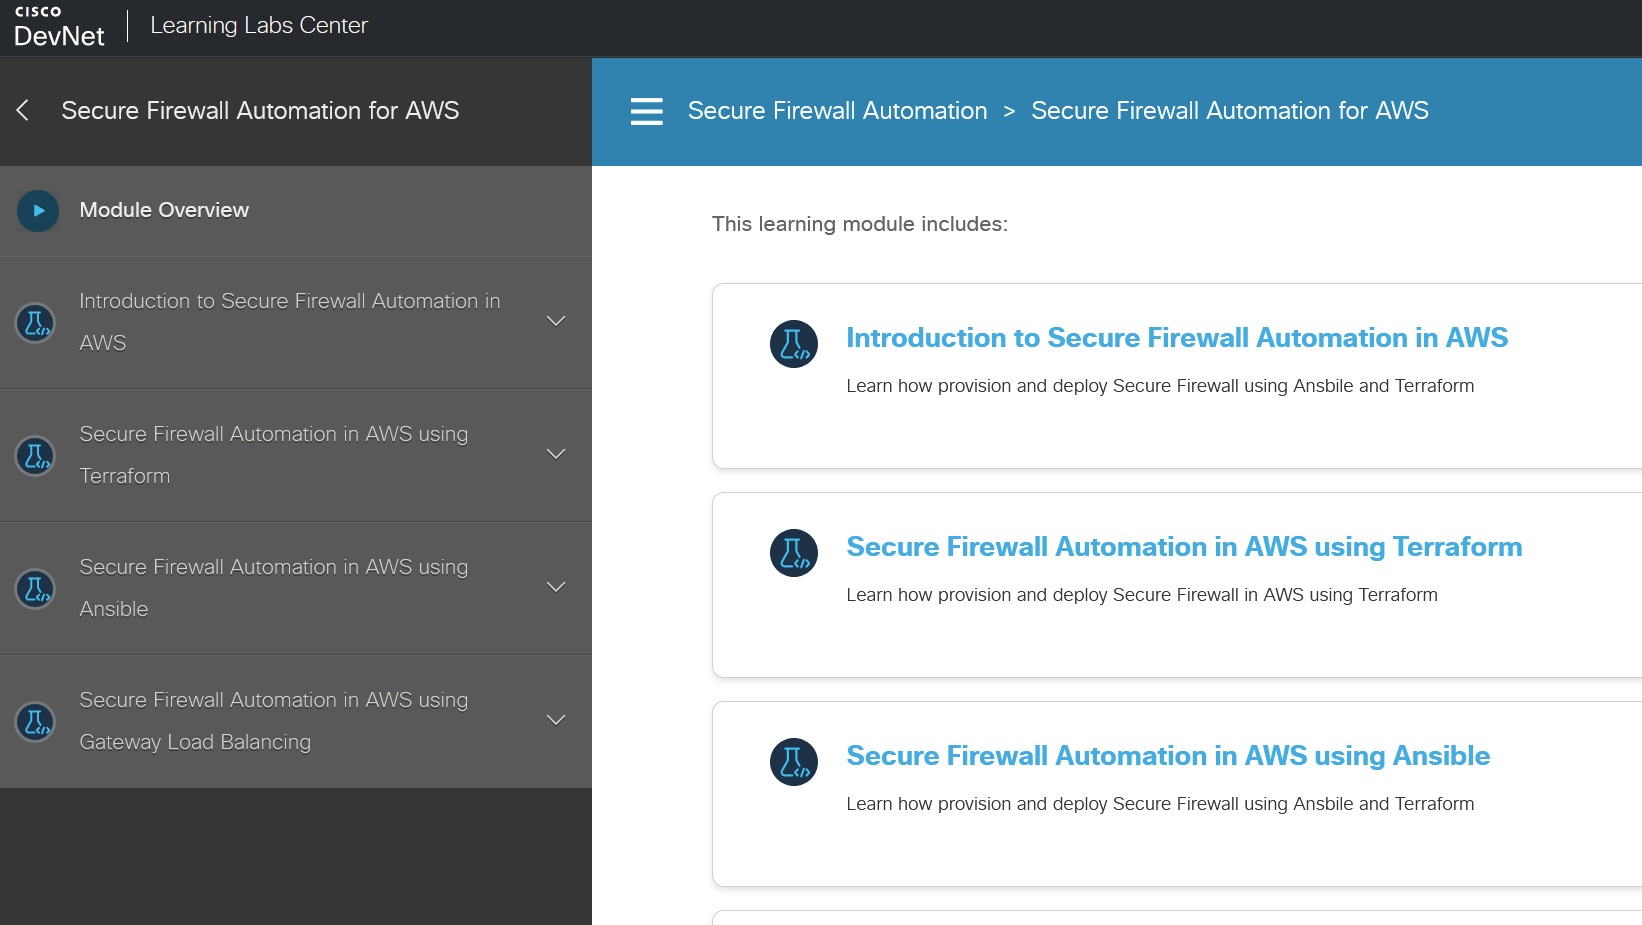 Secure Firewall Automation for AWS Lab